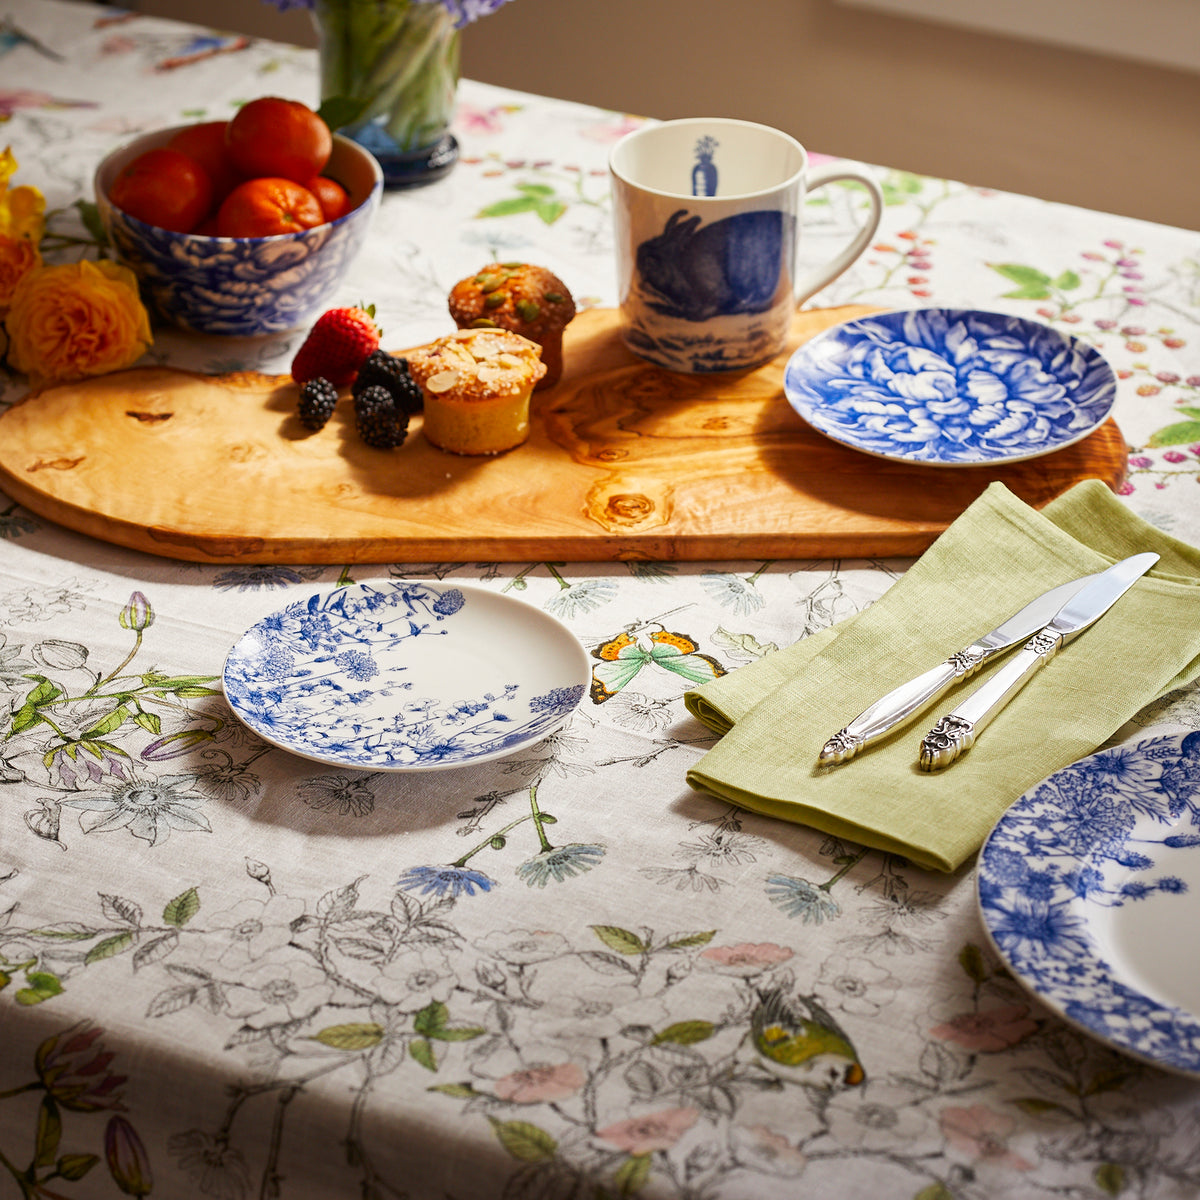 A table with a floral tablecloth displays a wooden platter with fruit, muffins, and a cup. Summer Blues Small Plates by Caskata, cutlery on green napkins, and flowers also adorn the table, making it an entertaining powerhouse.